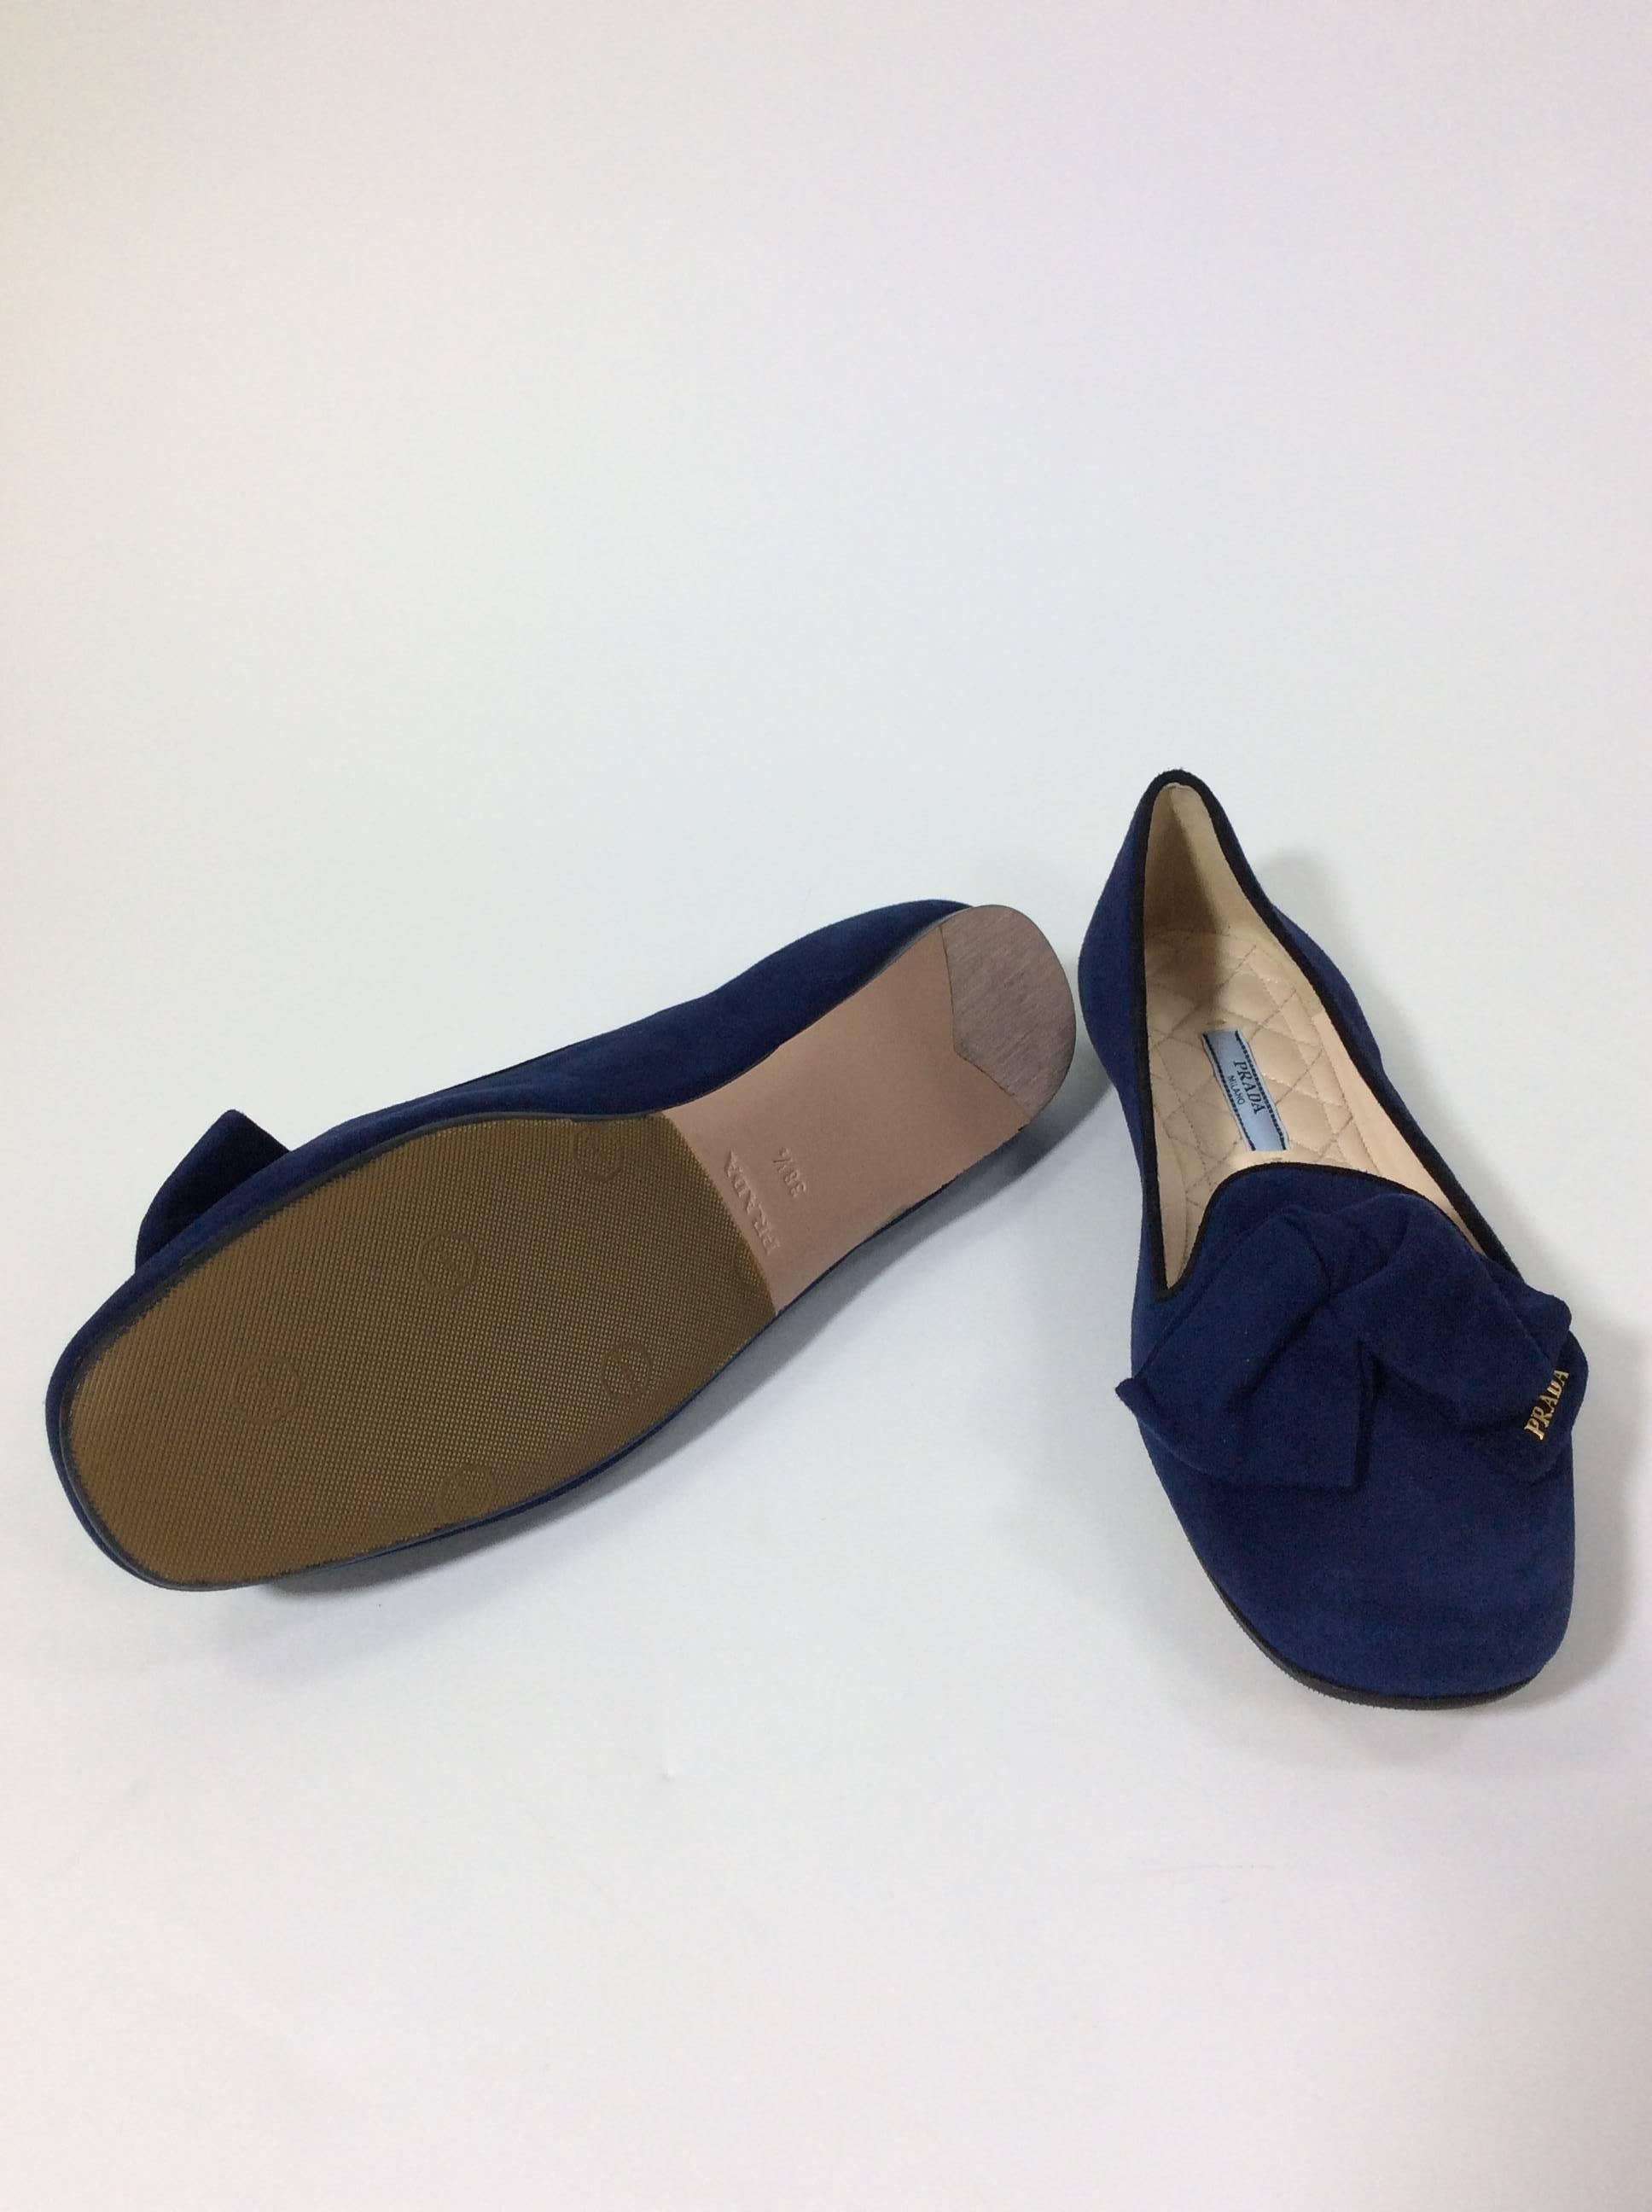 Women's Prada Navy Suede Loafers with Bow Detail